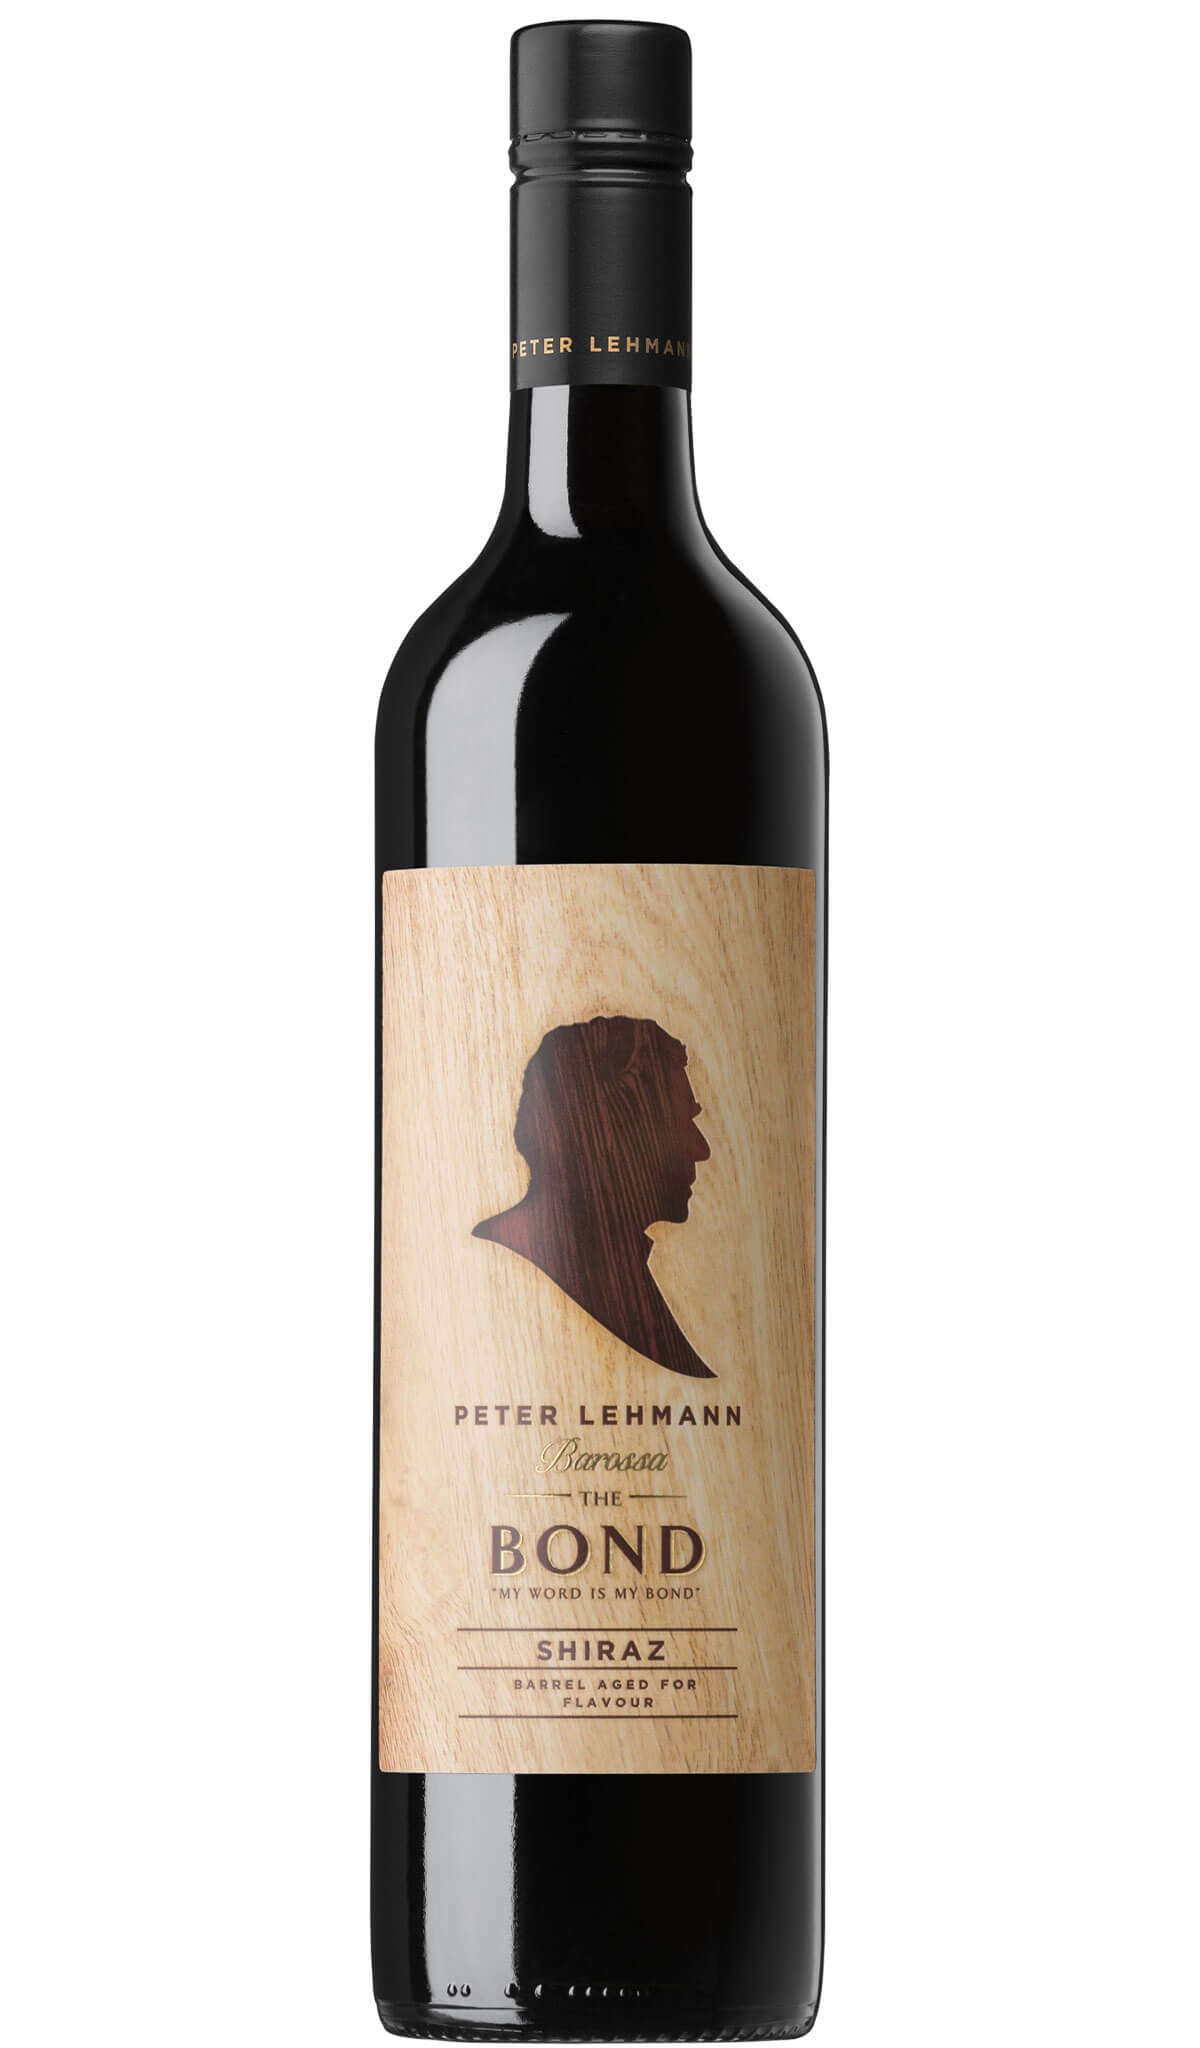 Find out more or buy Peter Lehmann The Bond Shiraz 2019 (Barossa Valley) online at Wine Sellers Direct - Australia’s independent liquor specialists.